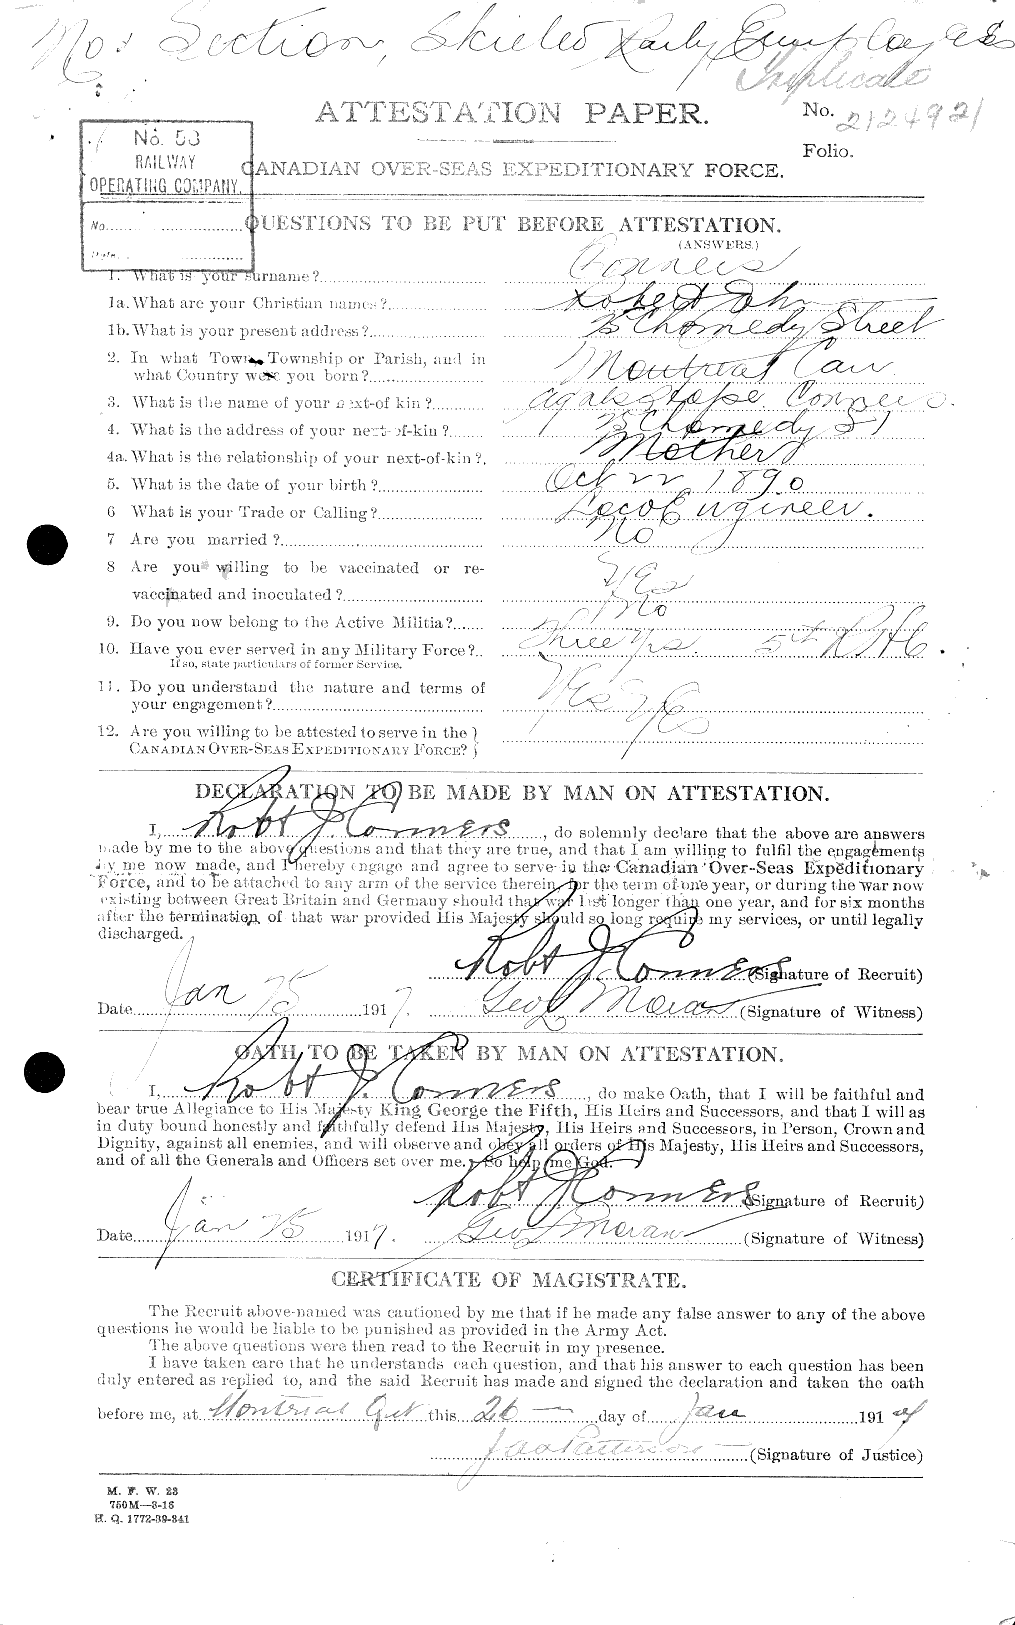 Personnel Records of the First World War - CEF 038463a